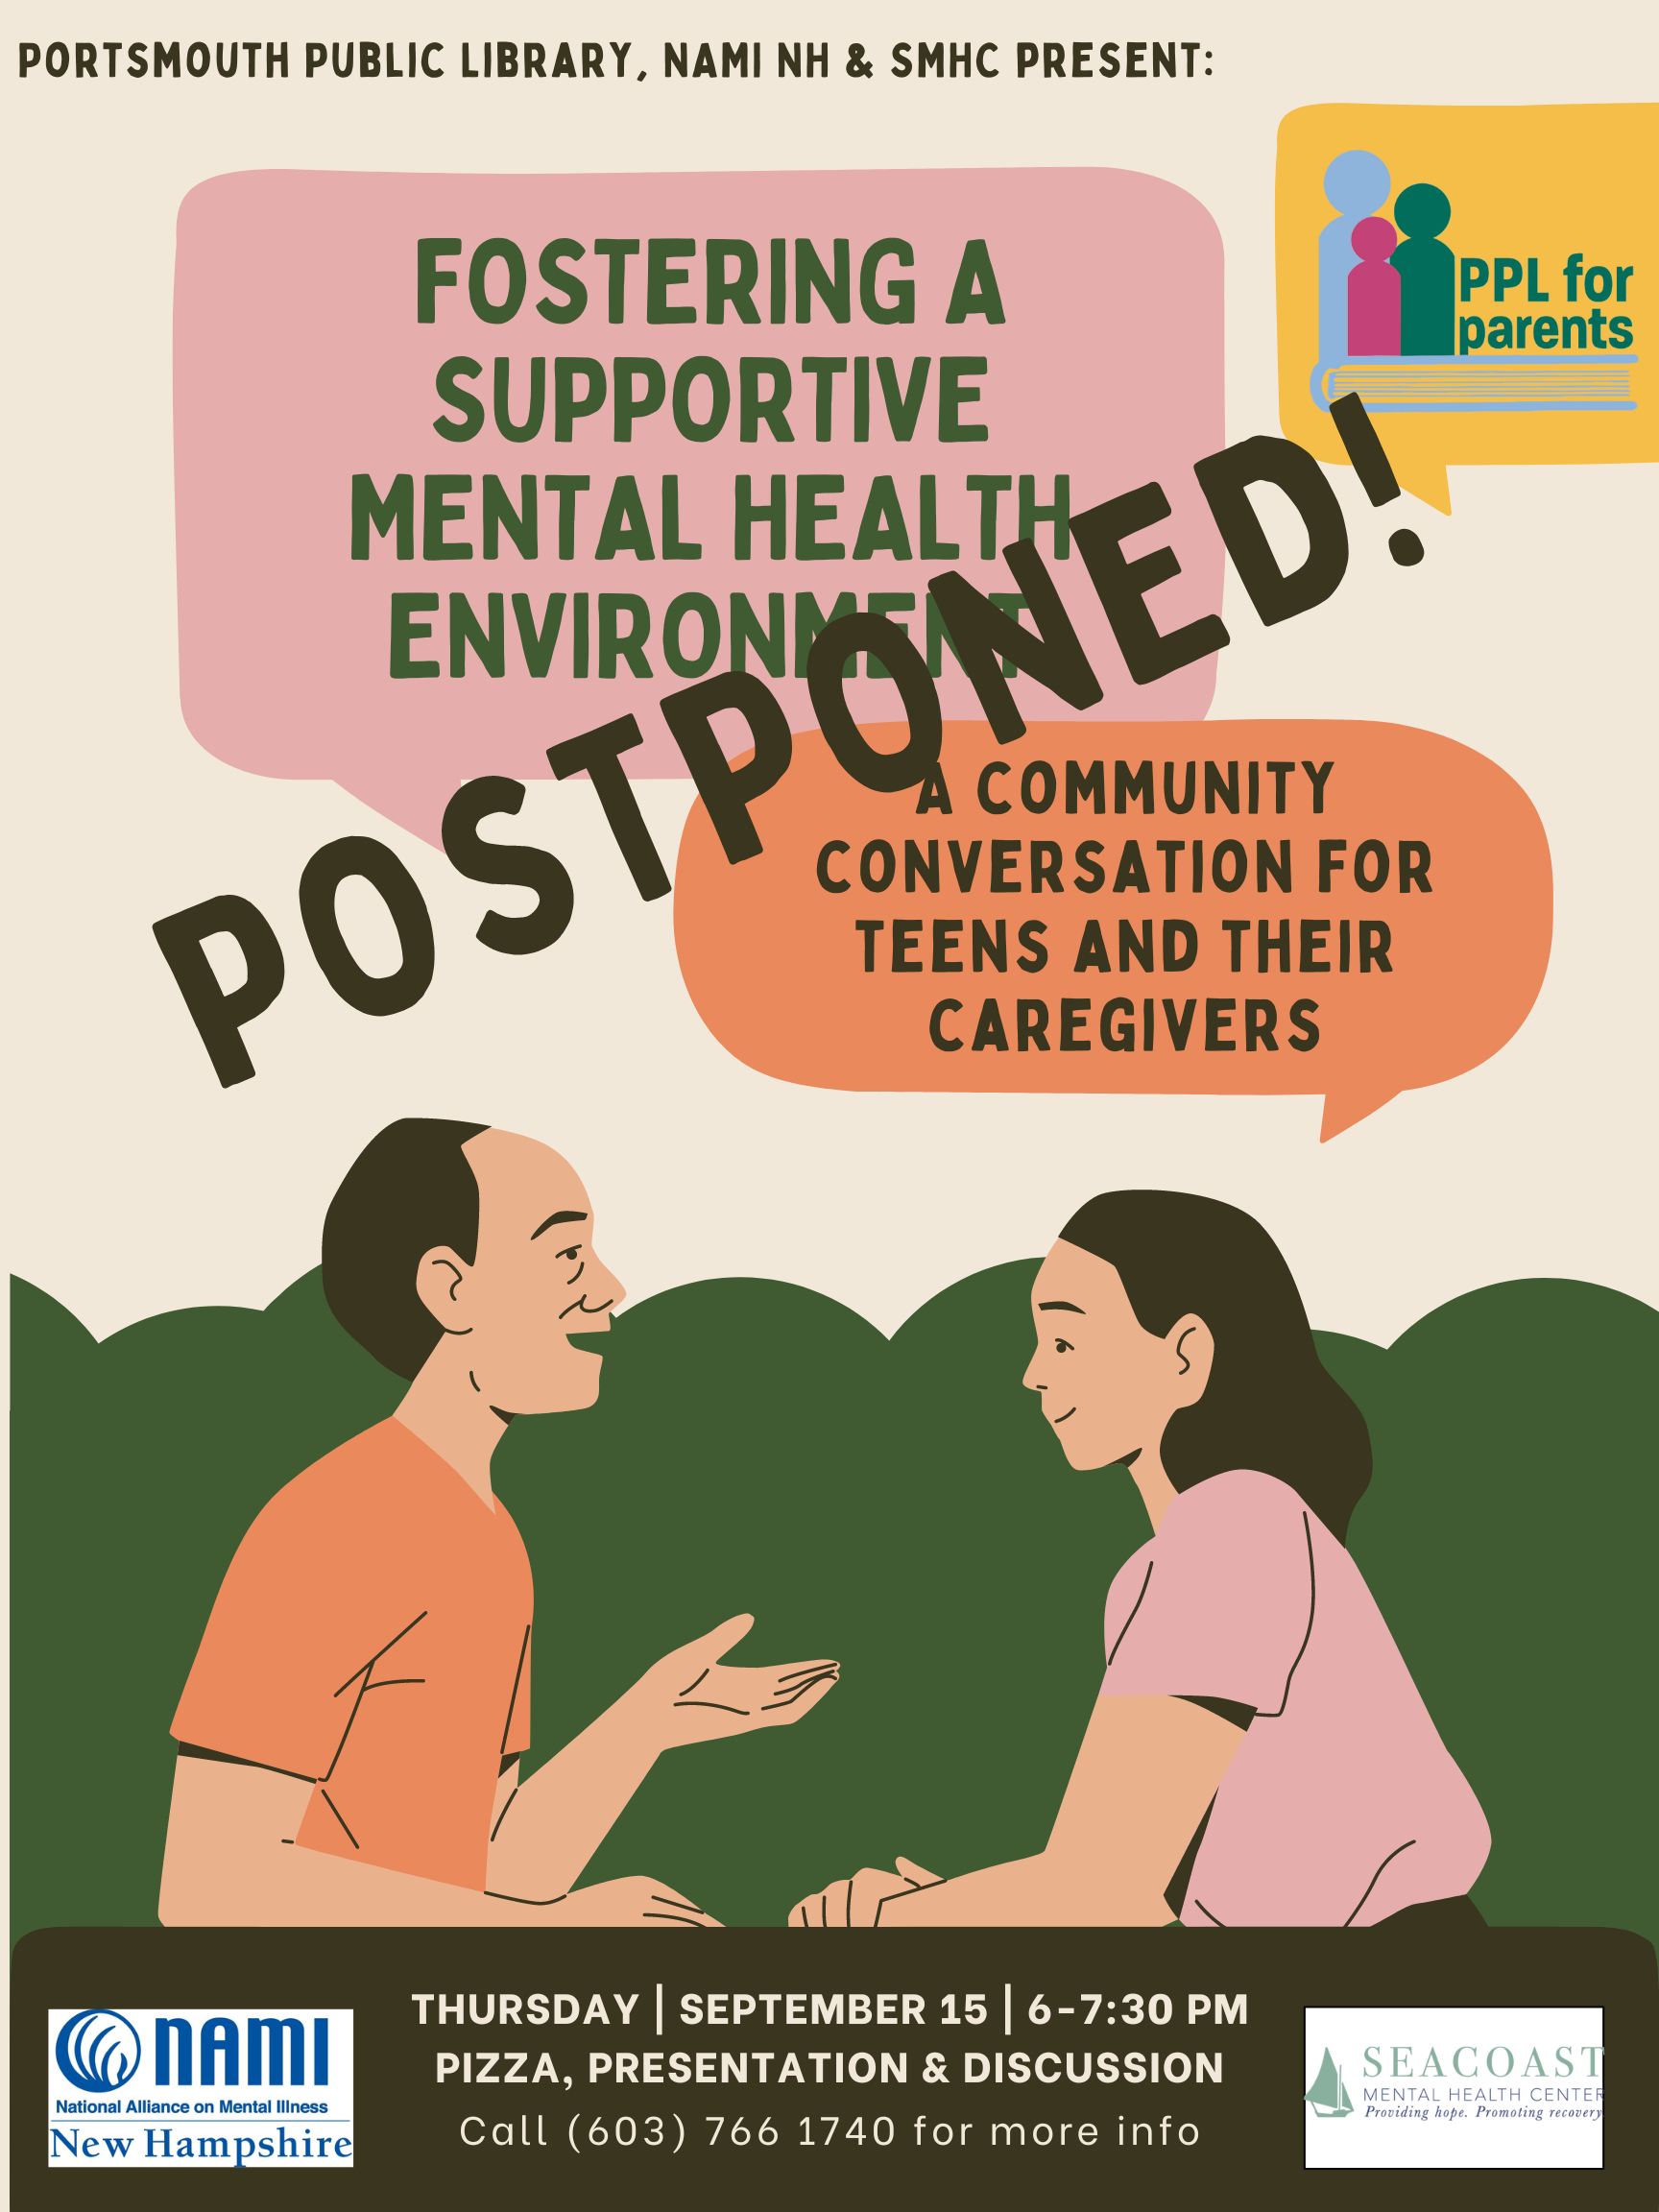 Caregiver and teen in conversation with dialogue boxes